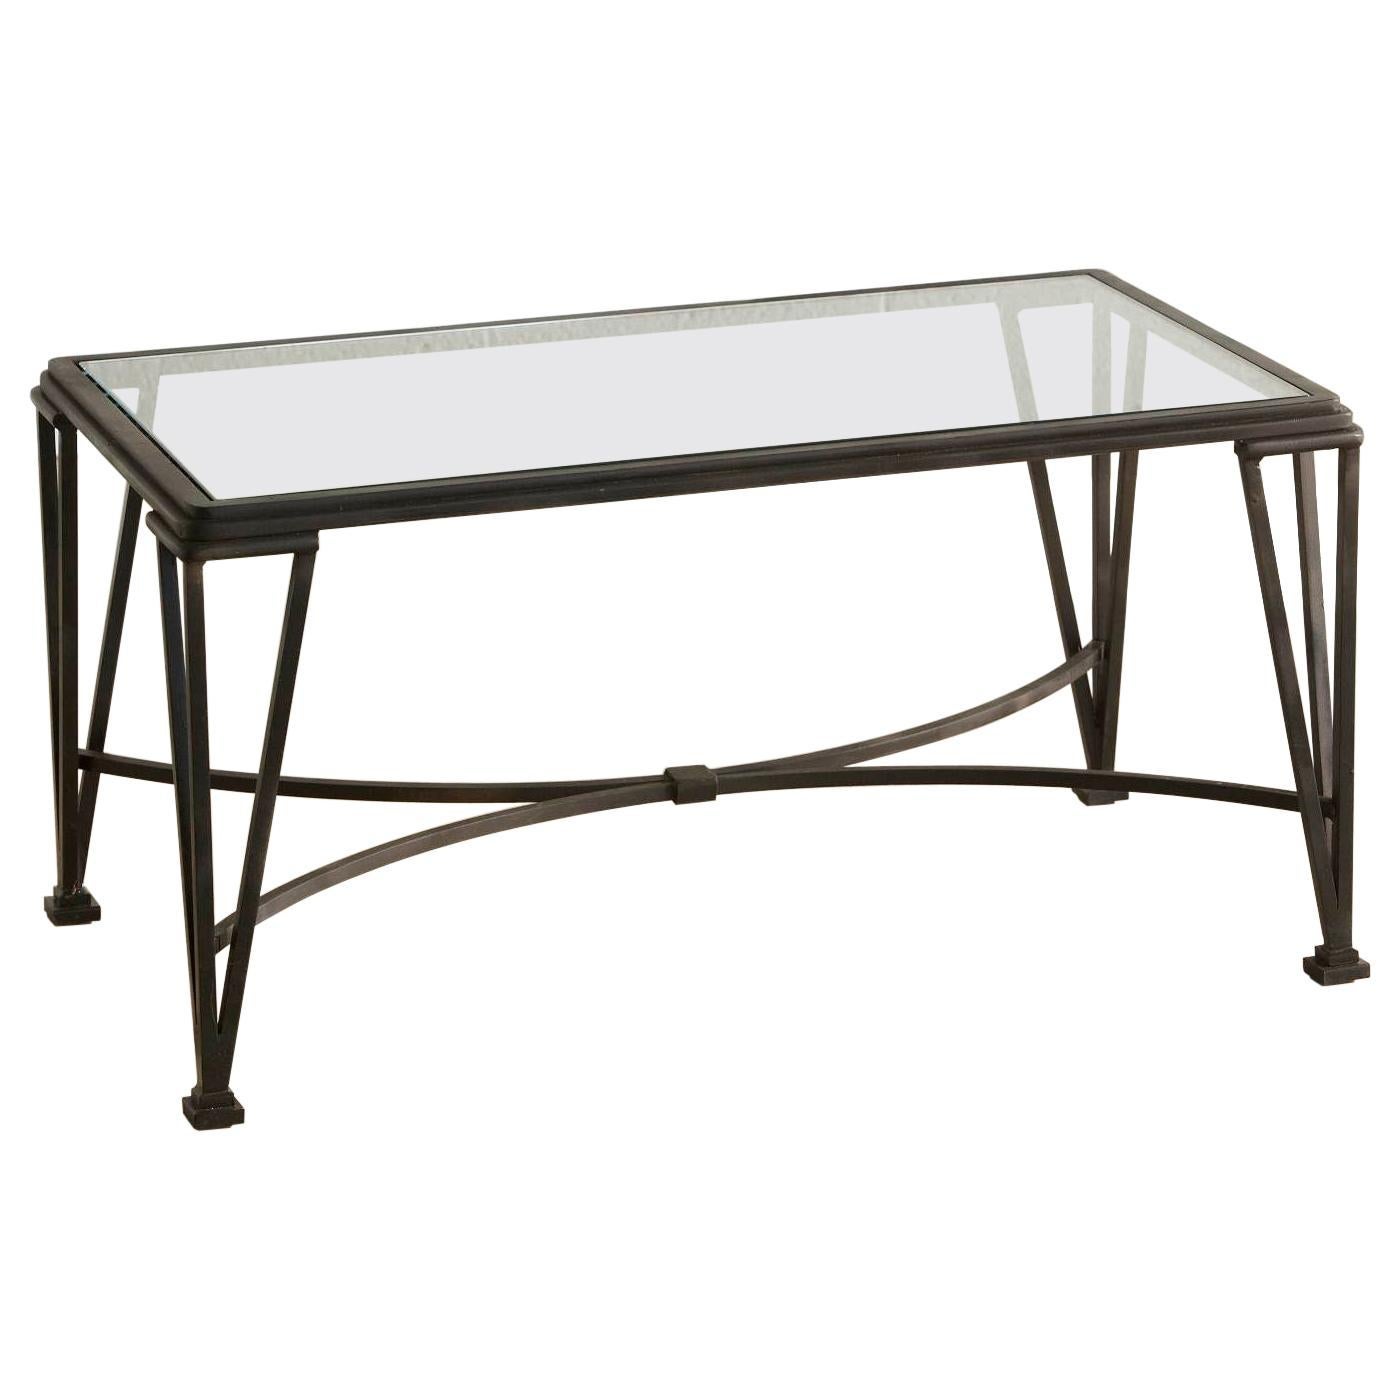 French Art Deco Style Wrought Iron Garden Cocktail or Side Table with Glass Top